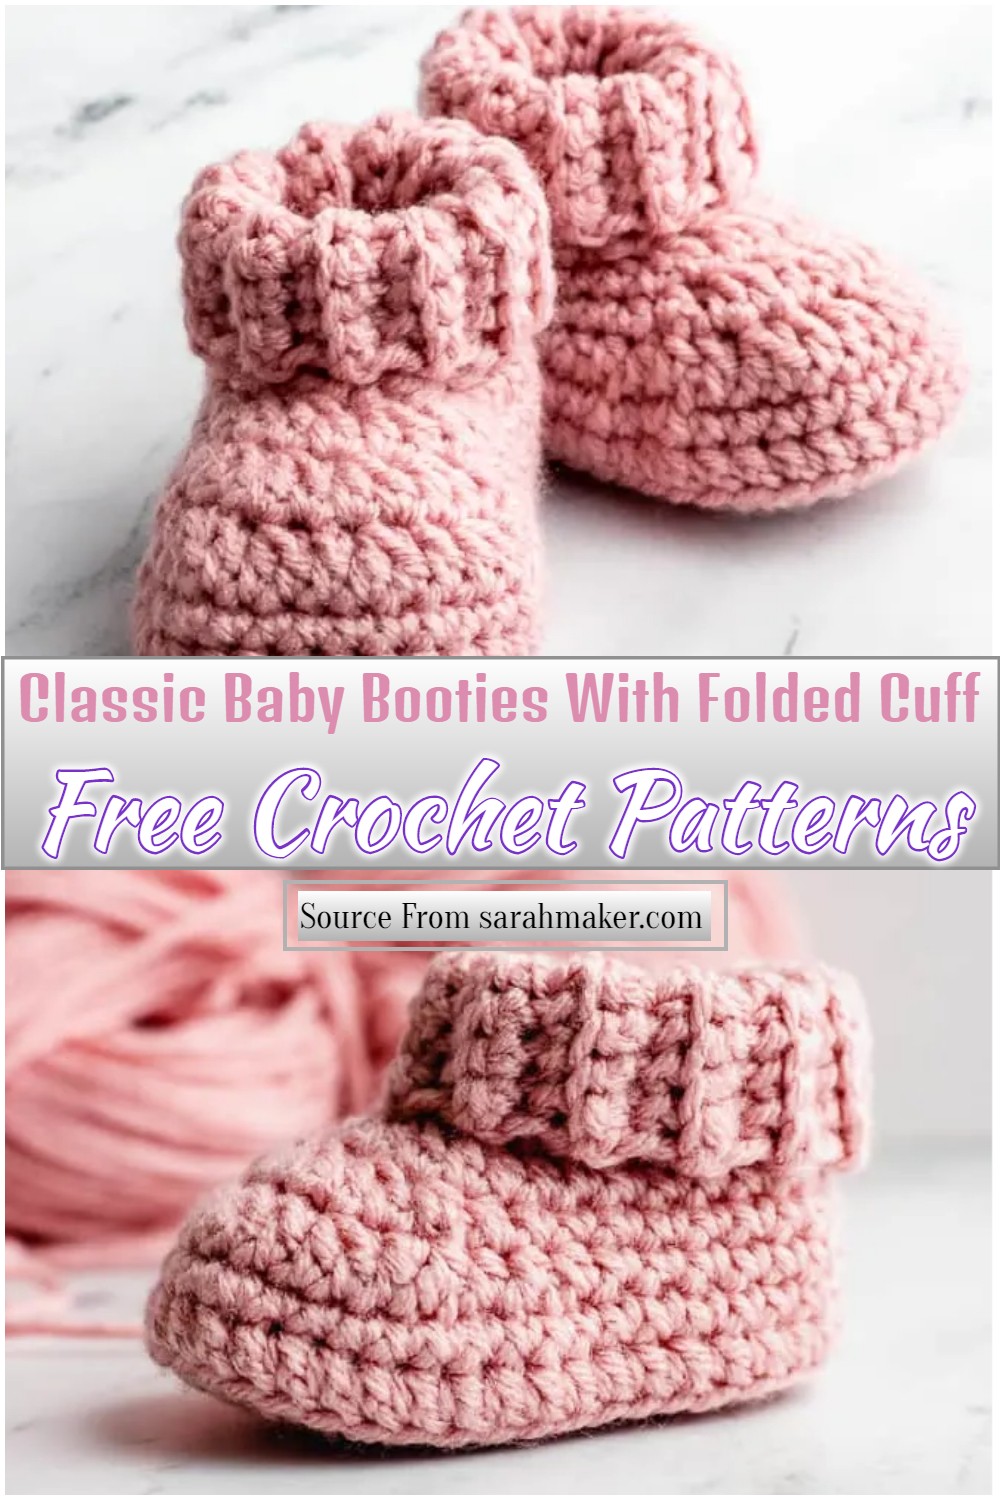 Free Crochet Classic Baby Booties With Folded Cuff Pattern